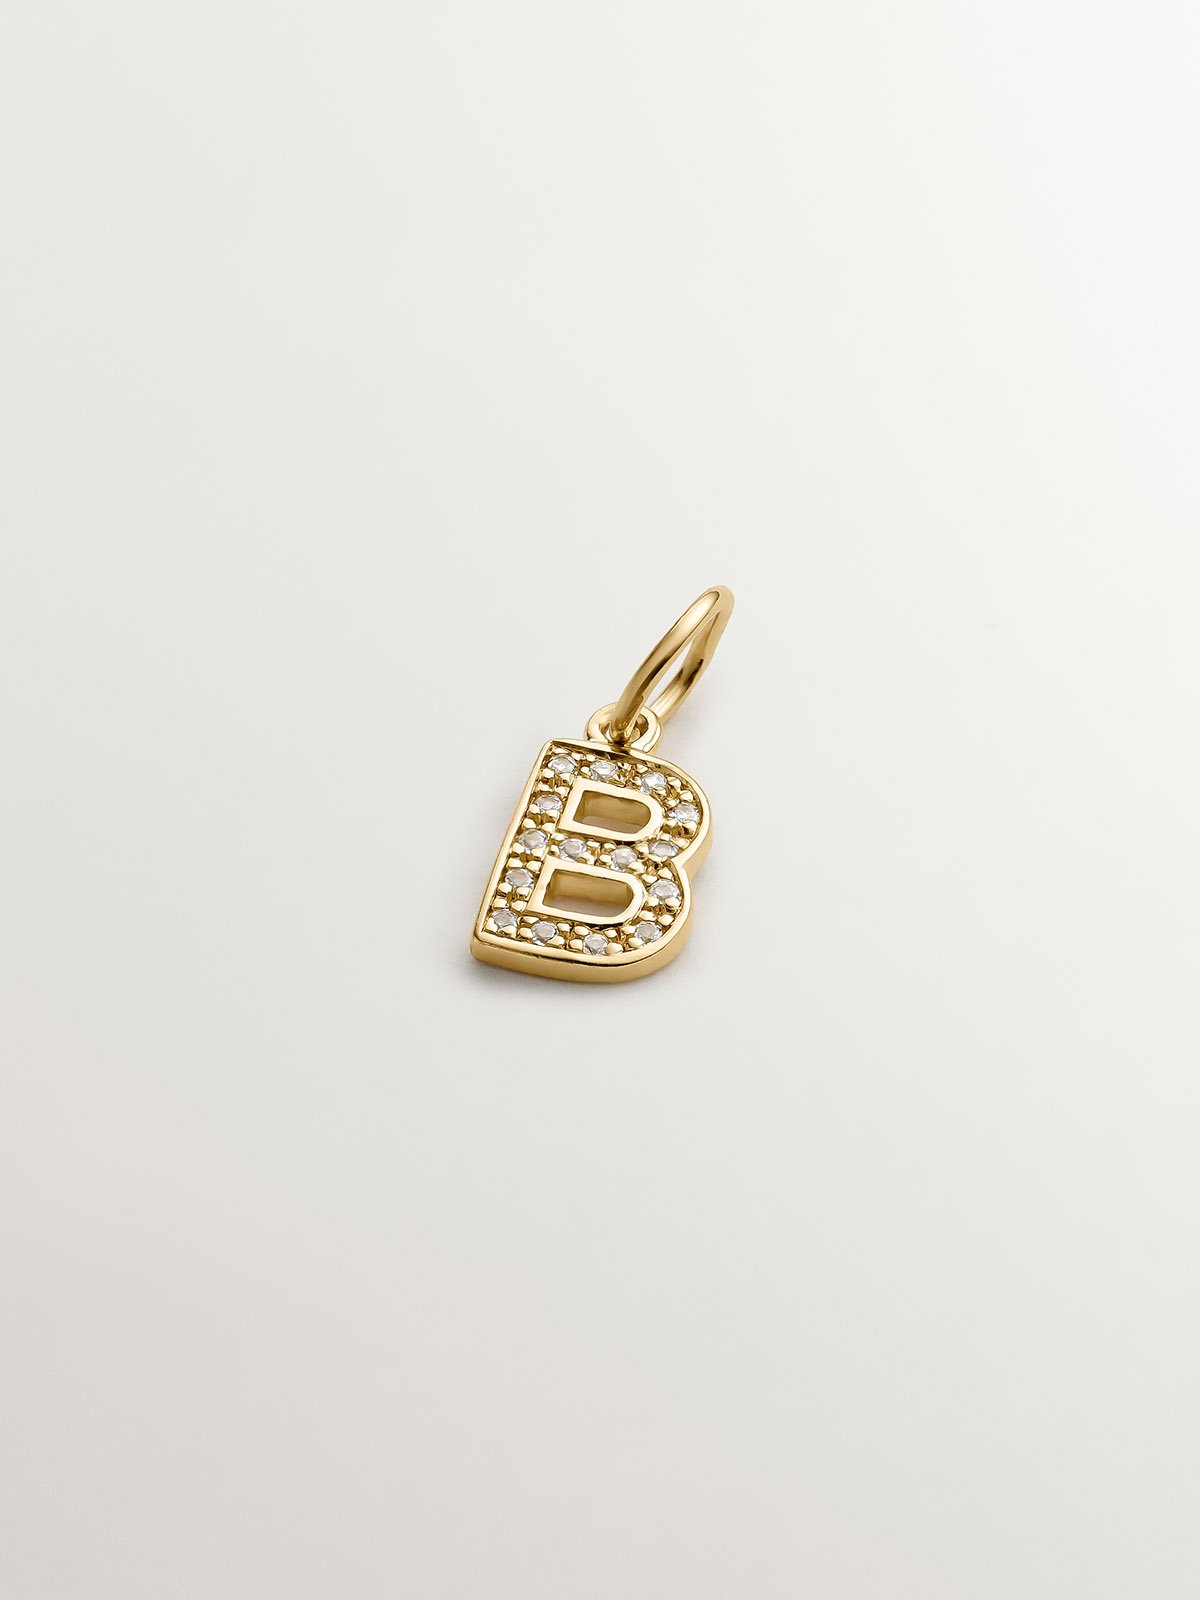 Initial B charm, made of 925 silver coated in 18K yellow gold and adorned with white topaz.